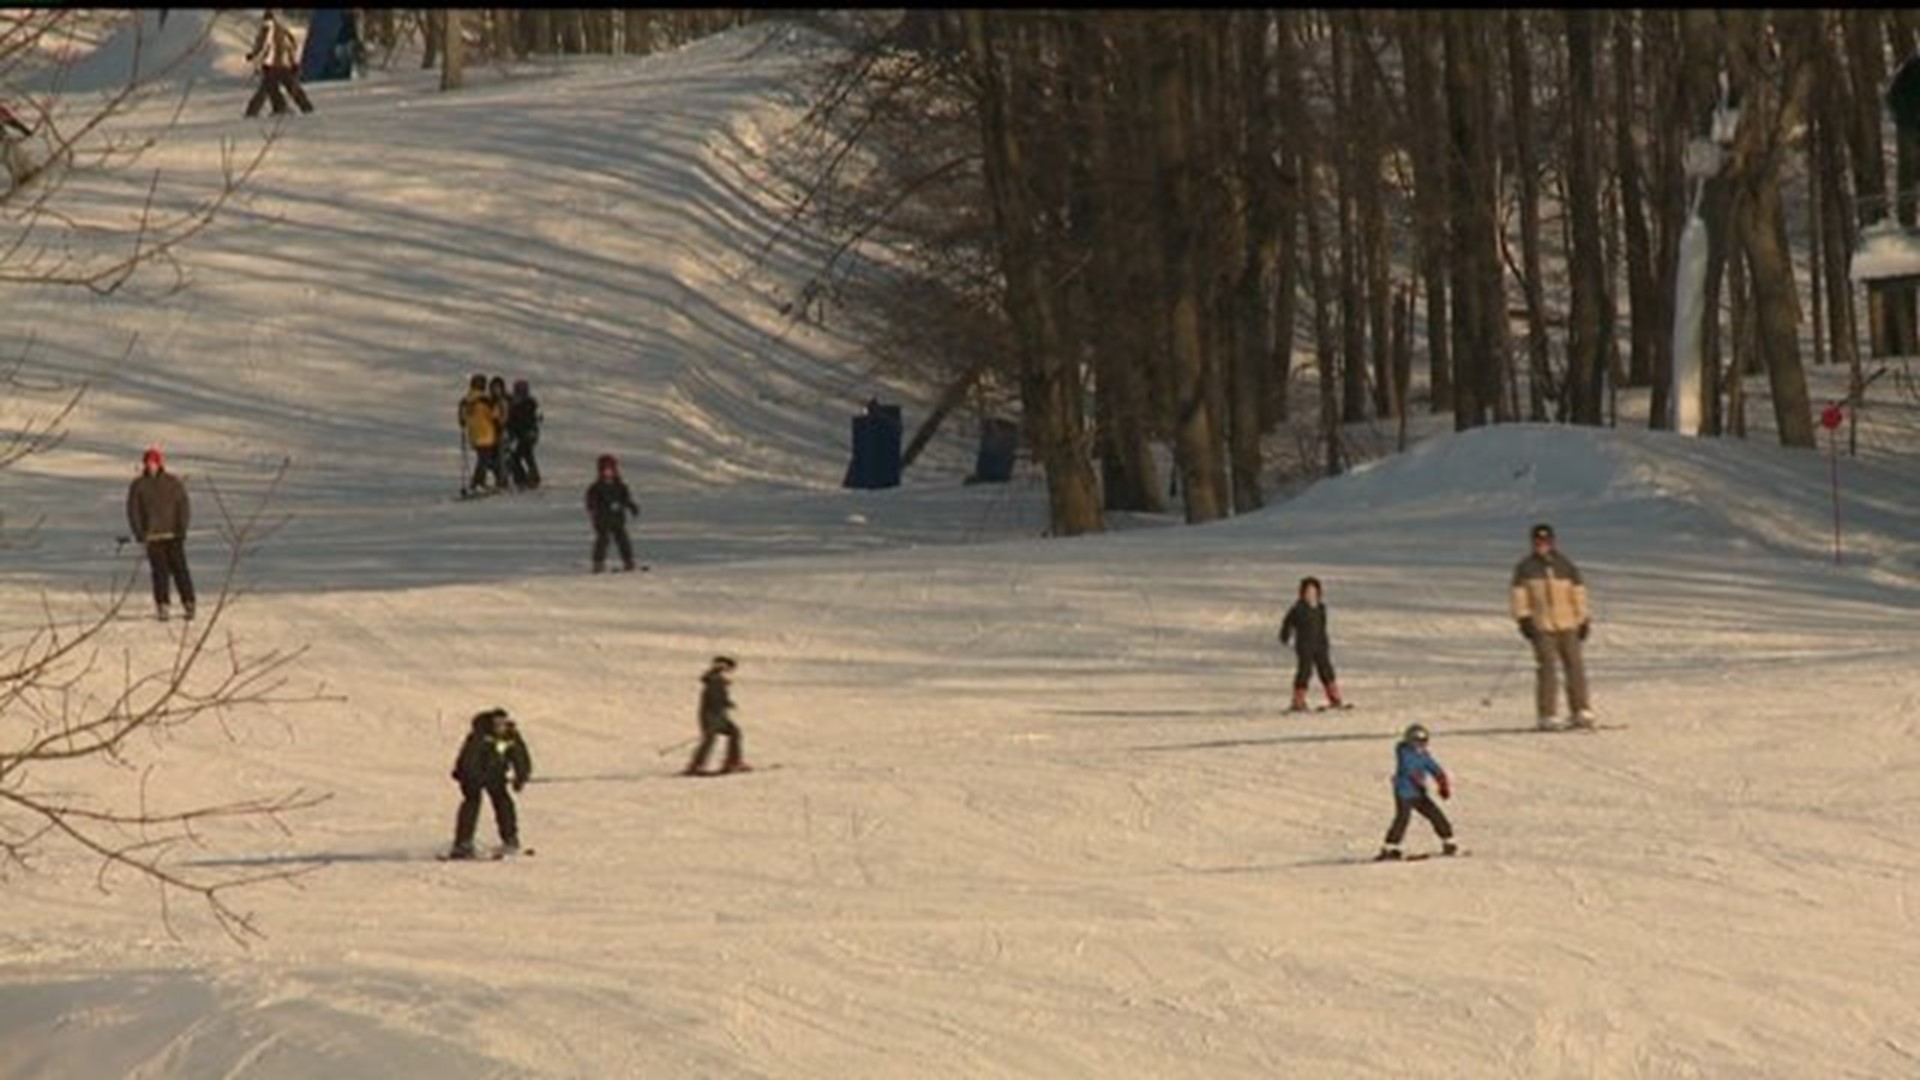 Relief from Winter Weather for Skiers, Snowboarders